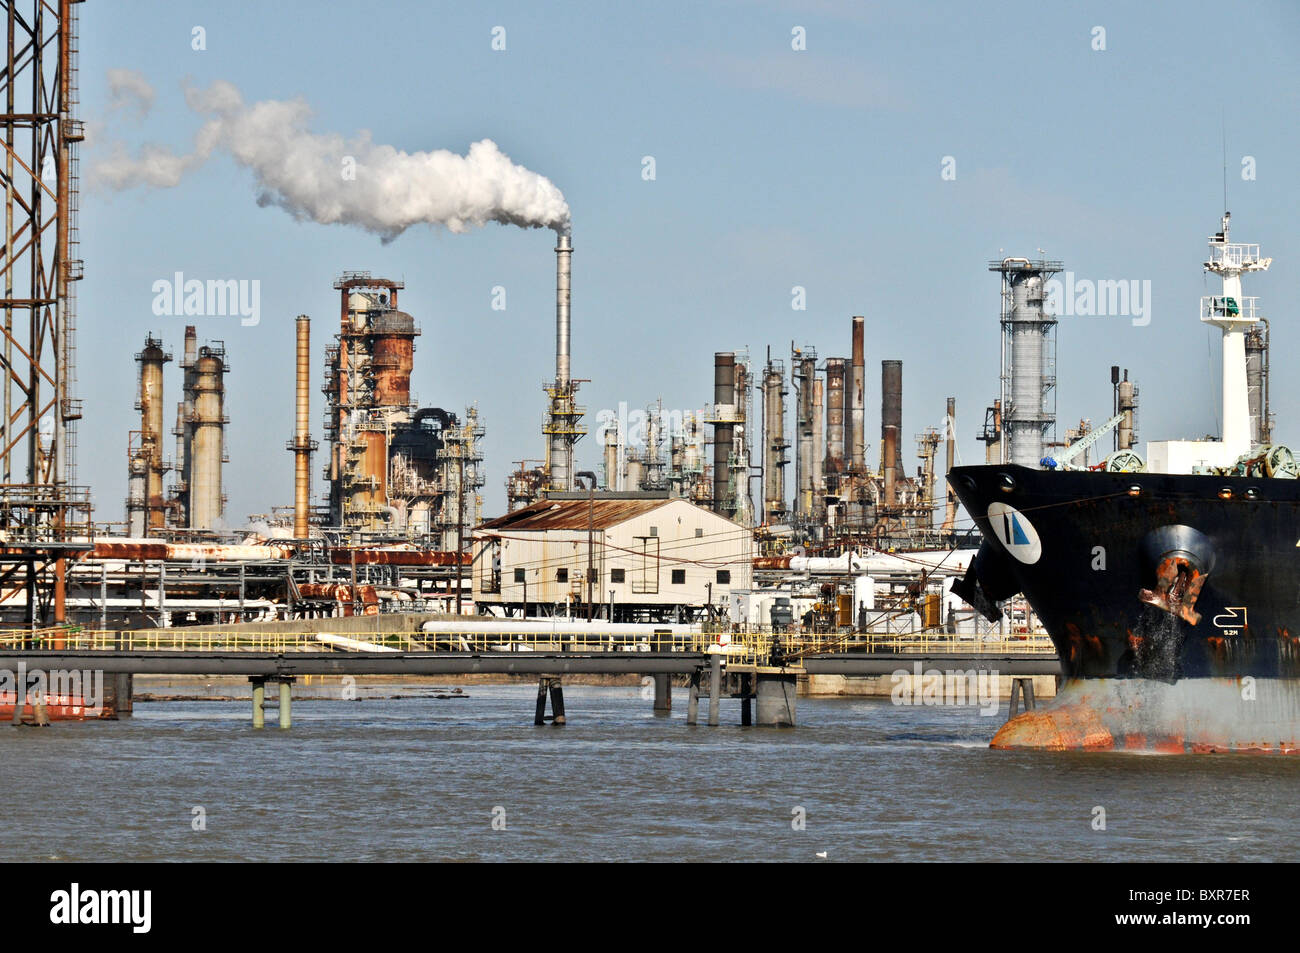 Chevron oil refinery (largest refinery in US), Mississippi River, New Orleans, Louisiana Stock Photo